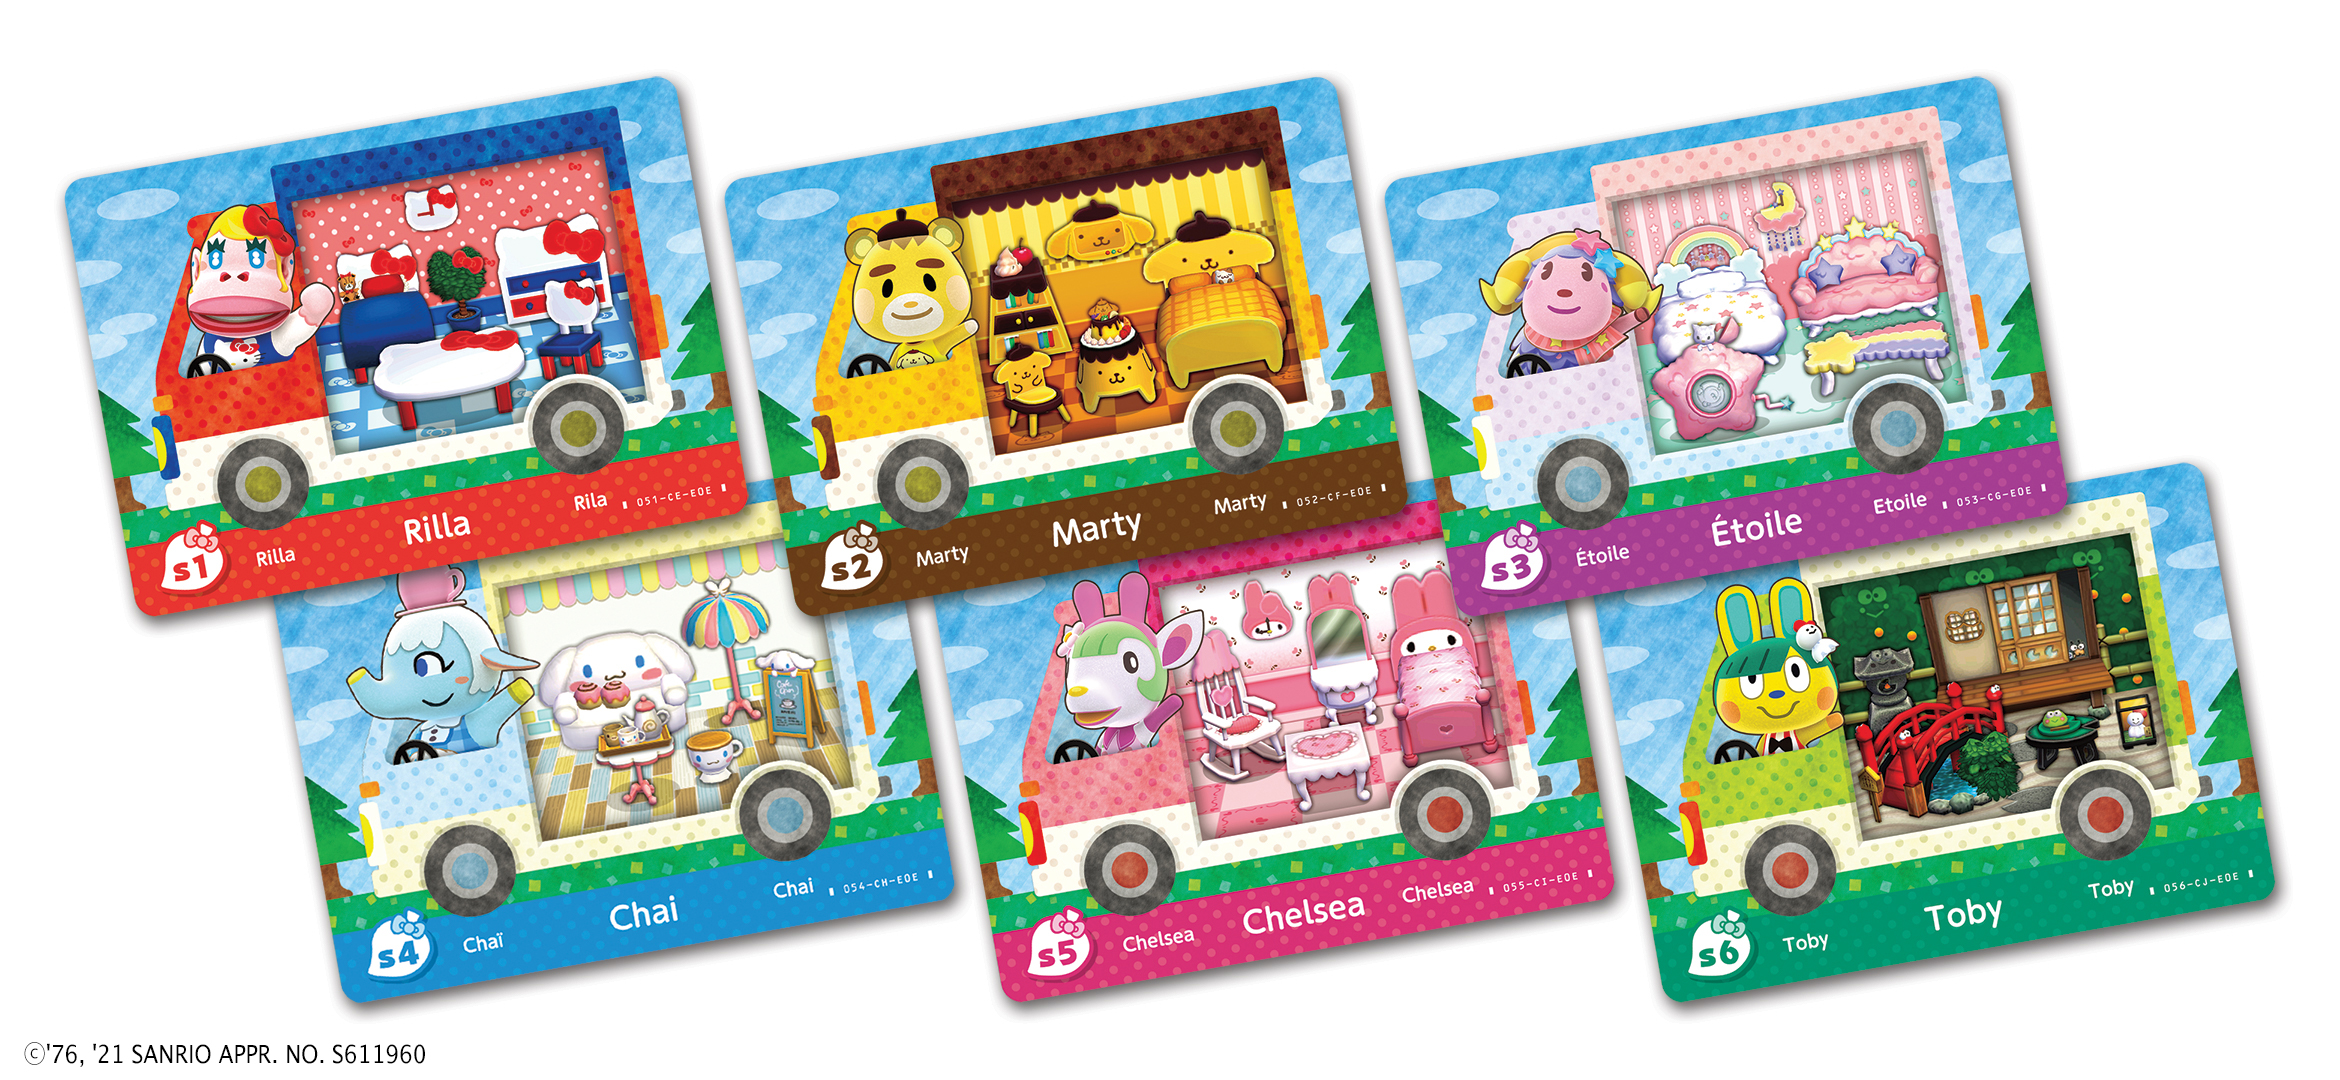 Where To Buy Animal Crossing Sanrio Amiibo Cards: Details & Order Guide - Animal  Crossing World